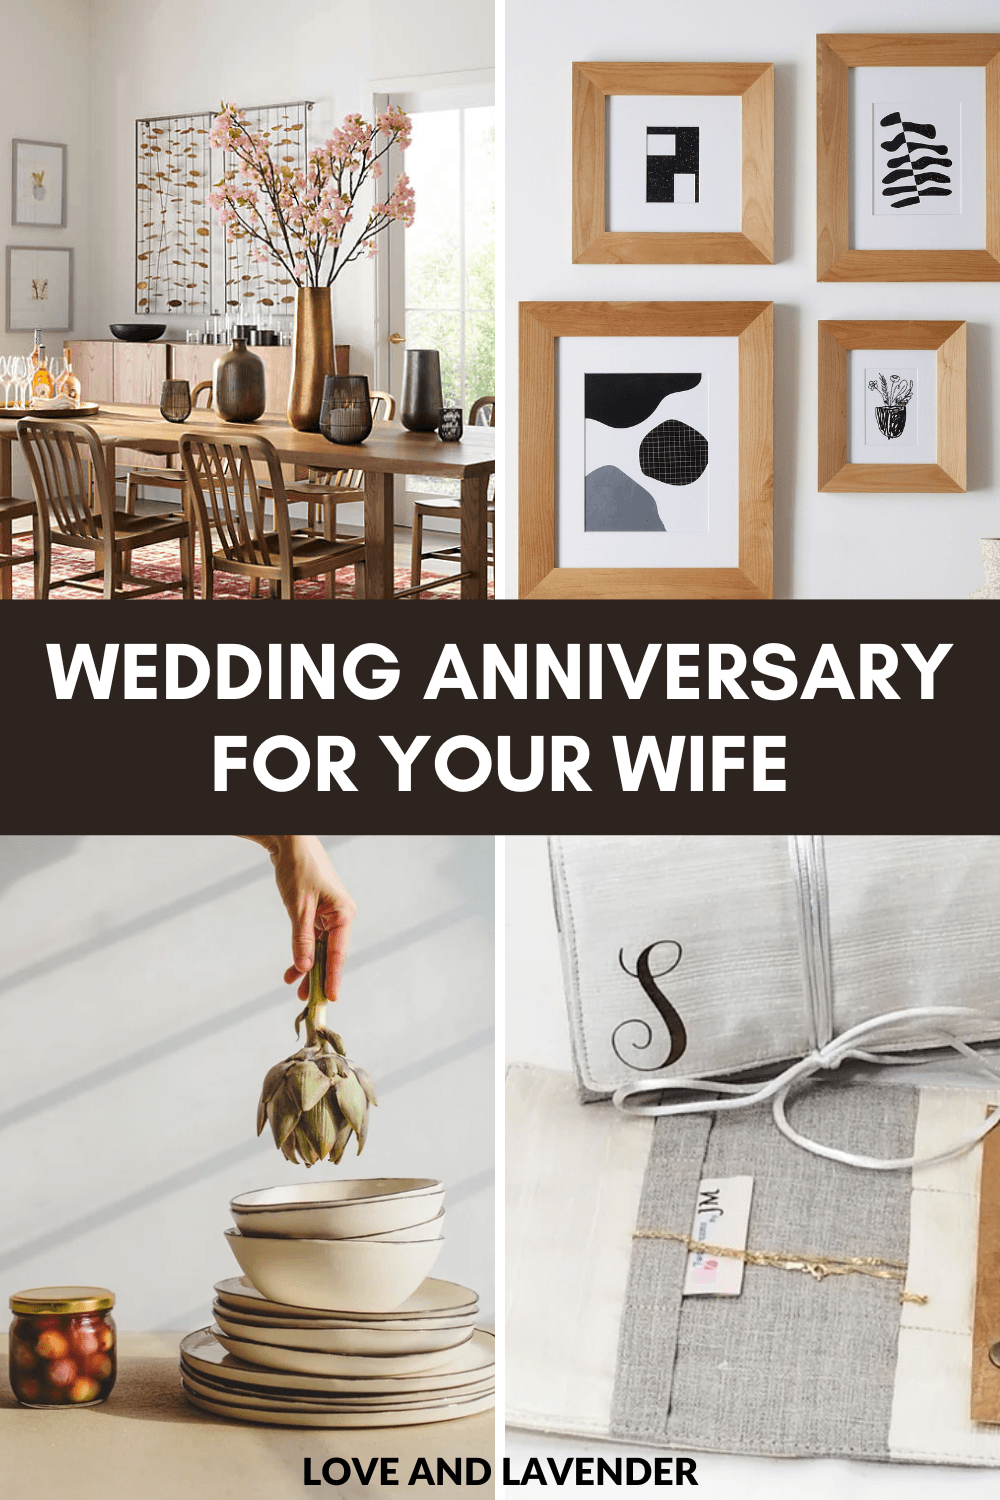 30 Best Wedding Anniversary Gift Ideas for Your Wife - Make Her Day Special!